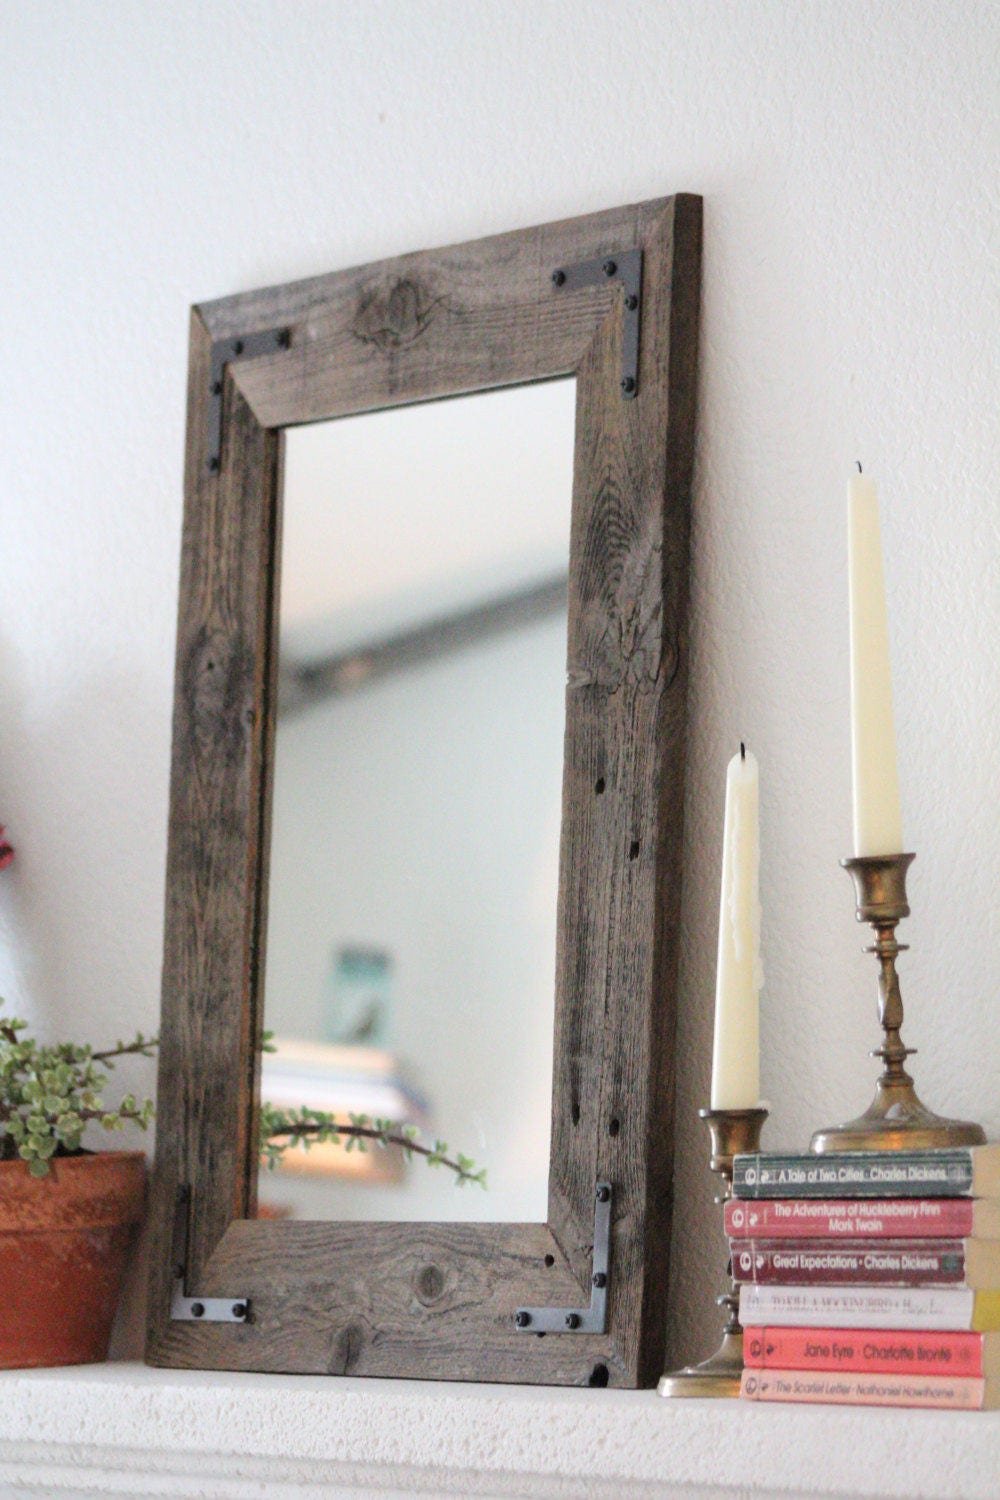 Small Mirror - Small Decorative Mirror and Small Wall Hanging Mirror